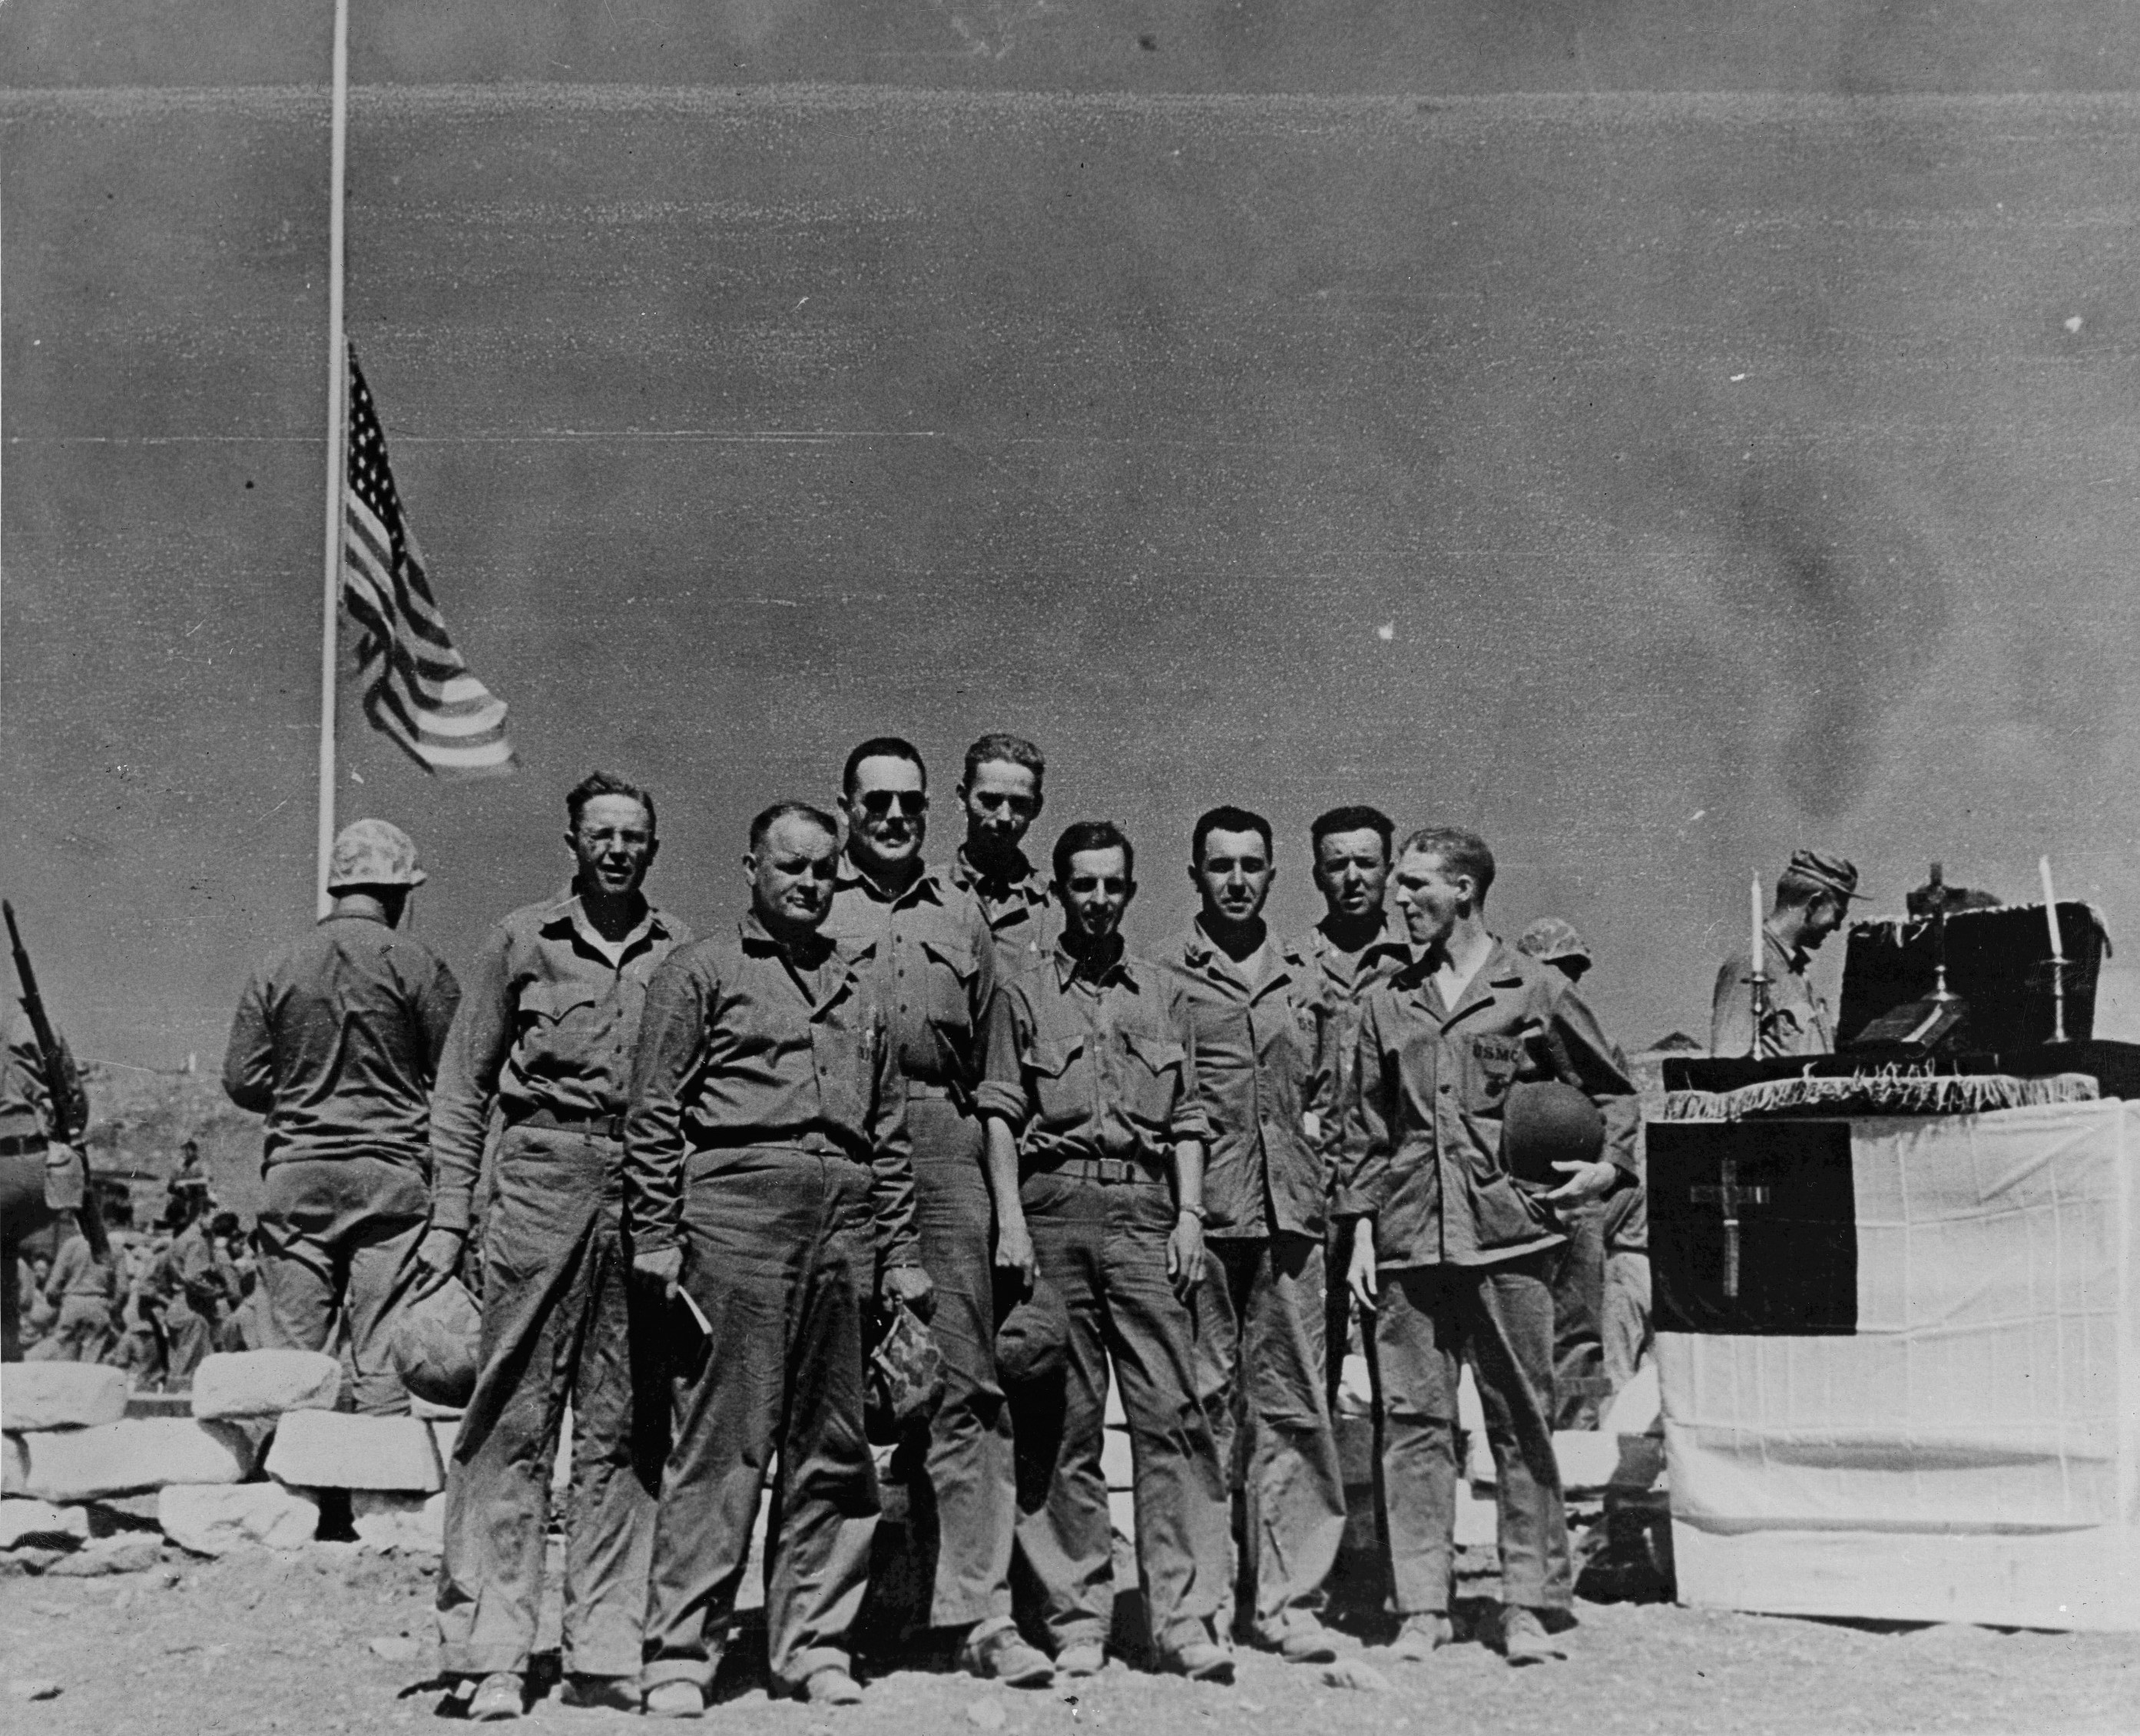 Chaplains Strum, Sartelle, Sneary, Barney, Hoatling, John Craven, Singer, and Wood of US 4th Marine Division at the division's cemetery on Iwo Jima, Japan, Mar 1945